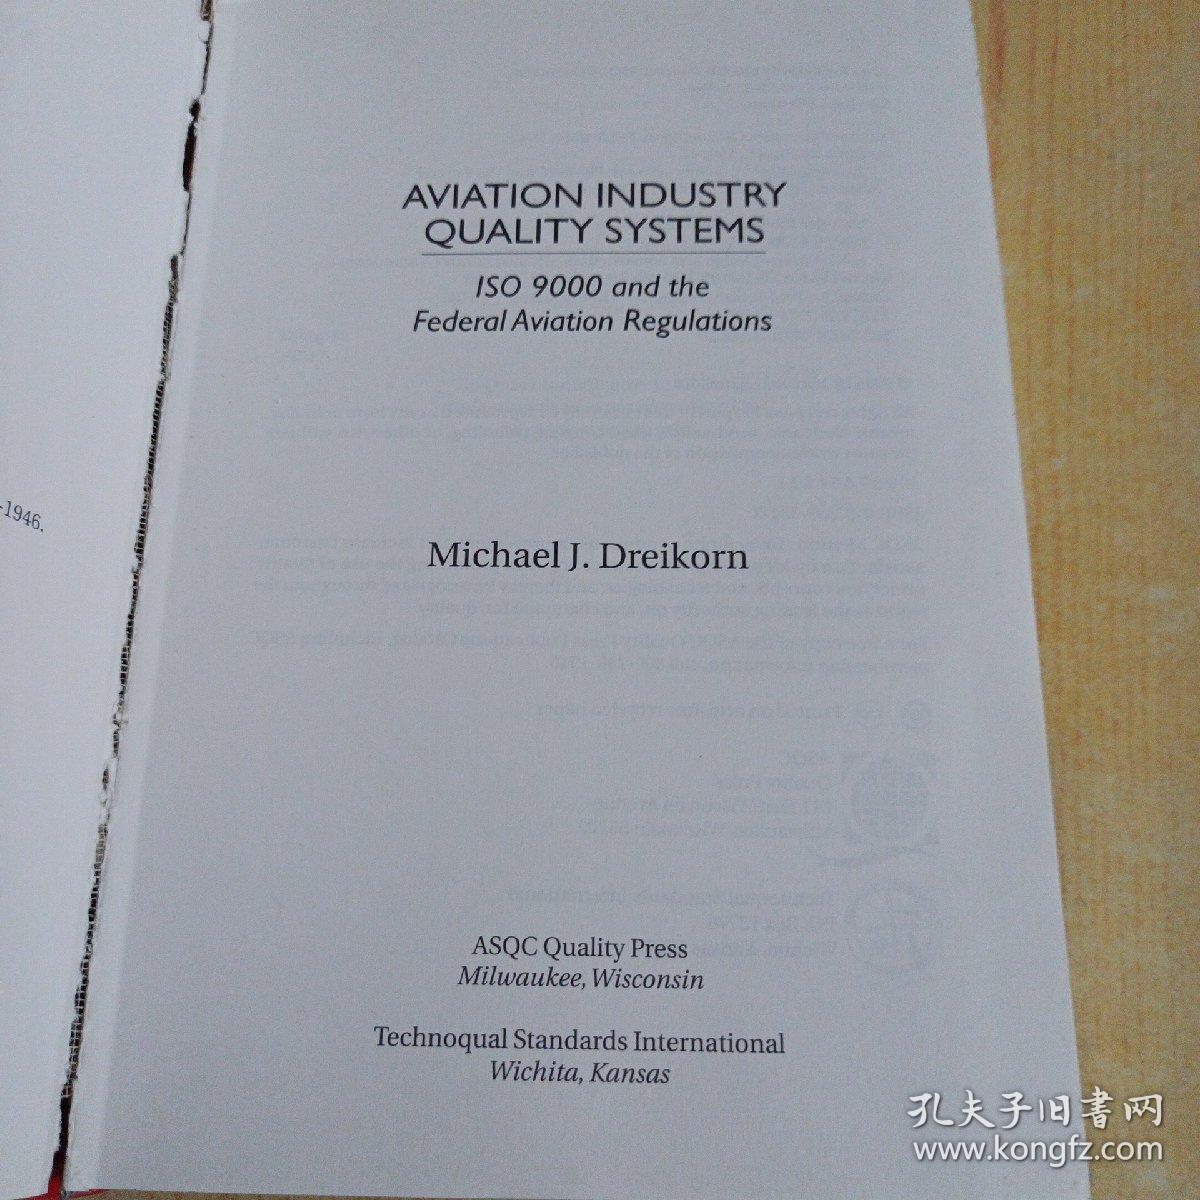 AVIATION INDUSTRY QUALITY SYSTEMS